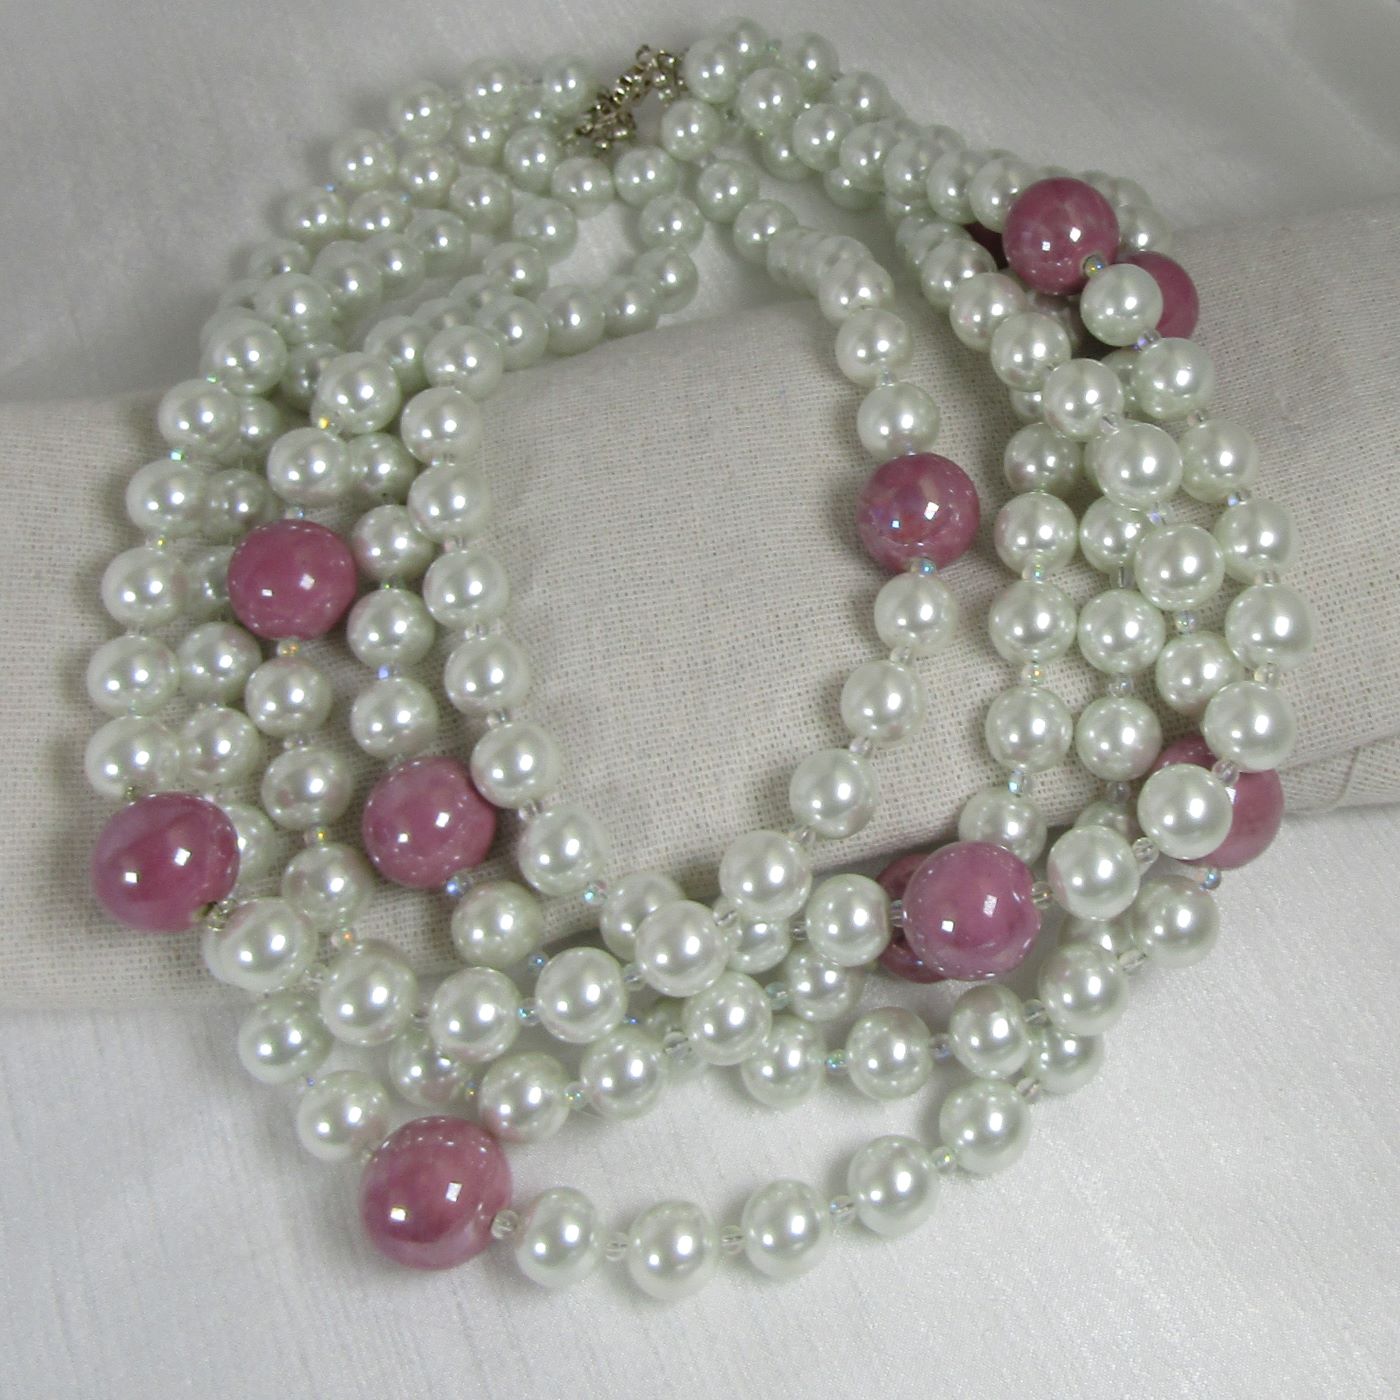 Big Bold Statement Pearl Necklace 5 Strands - VP's Jewelry